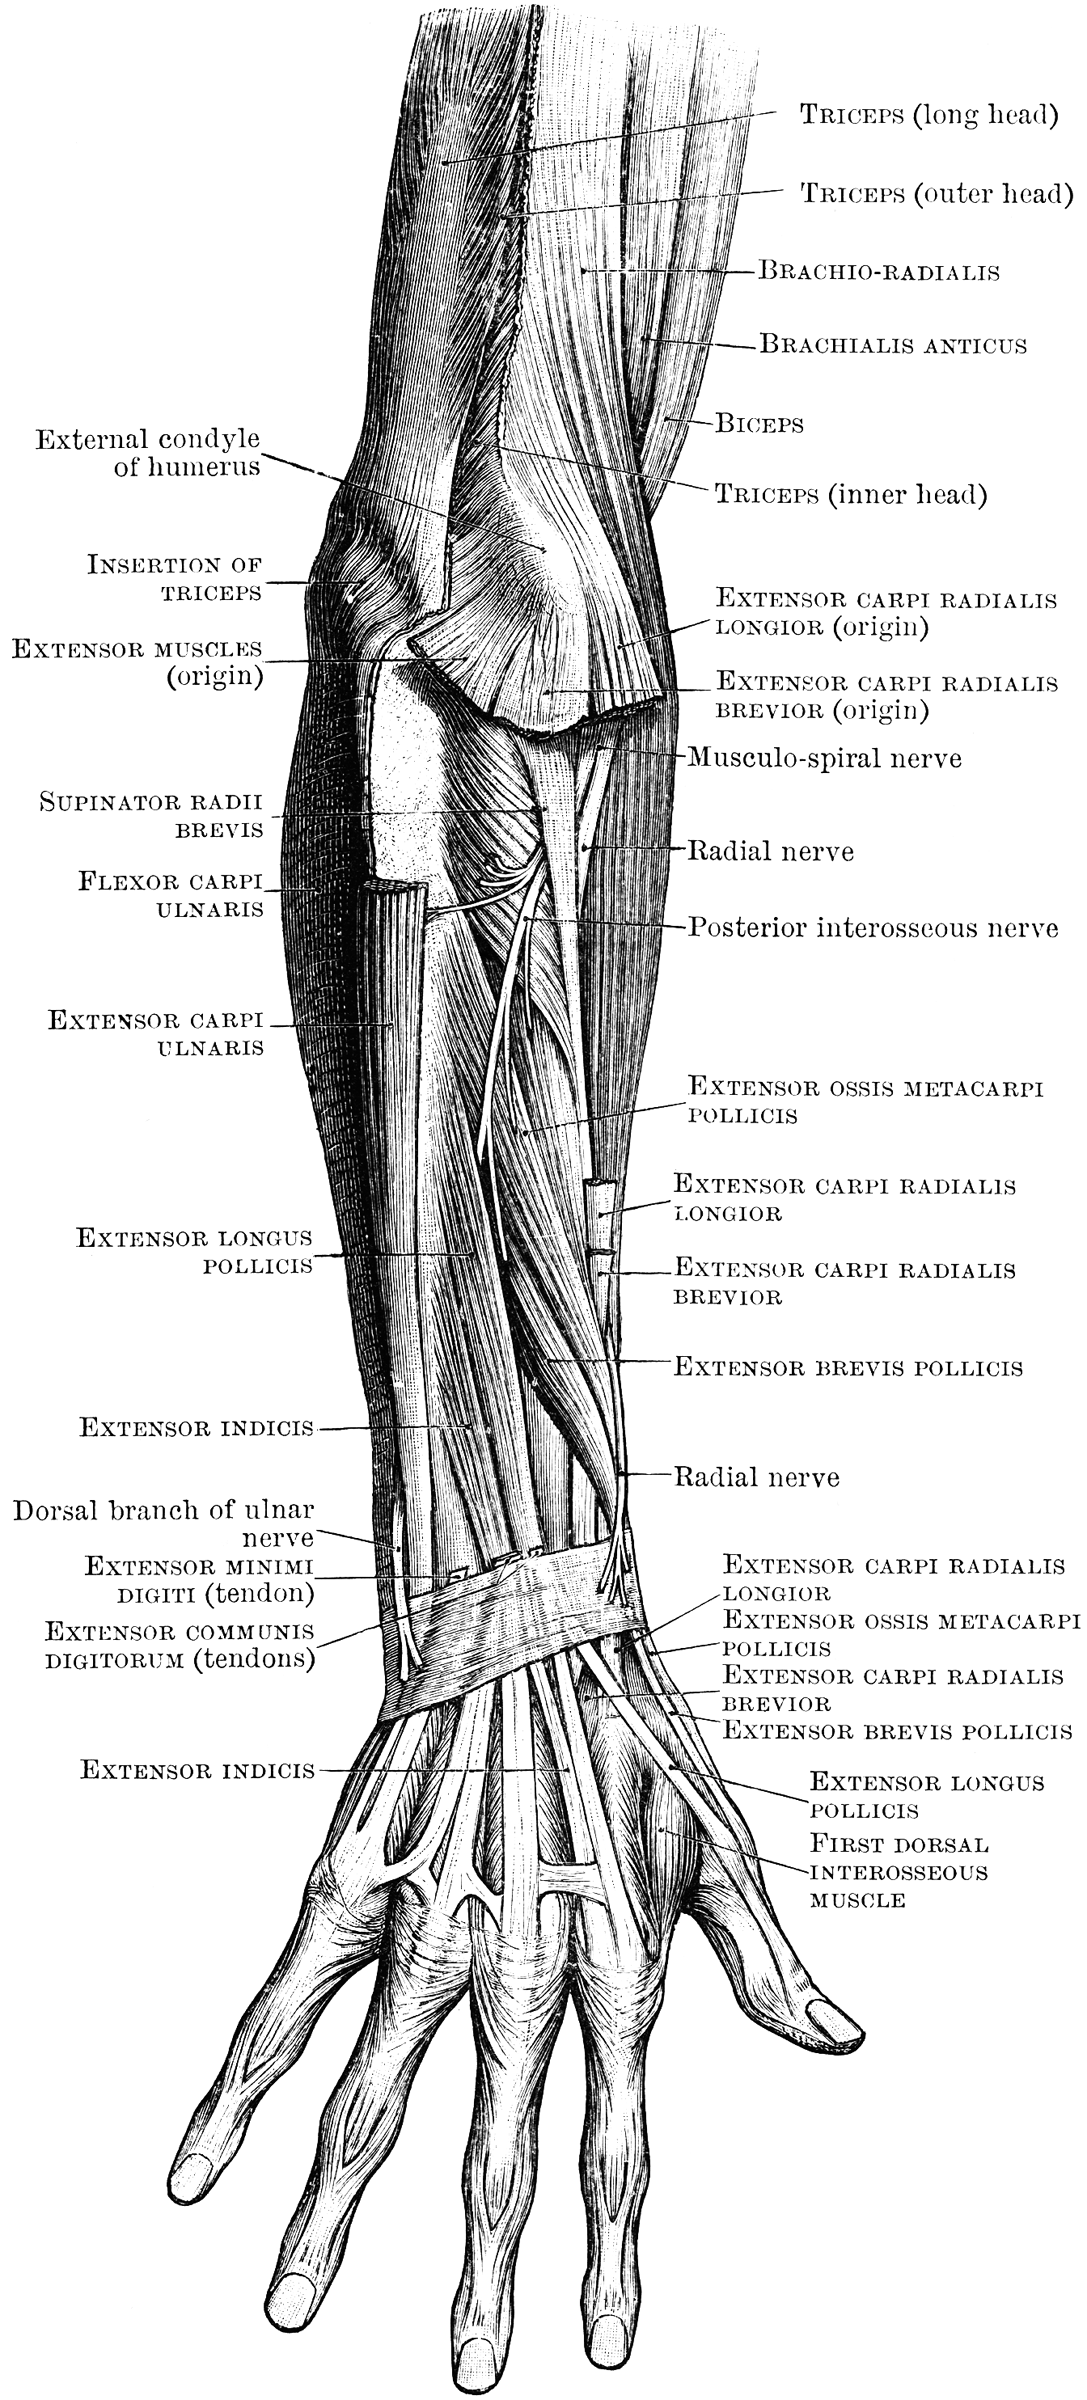 Muscles of the Back Forearm | ClipArt ETC